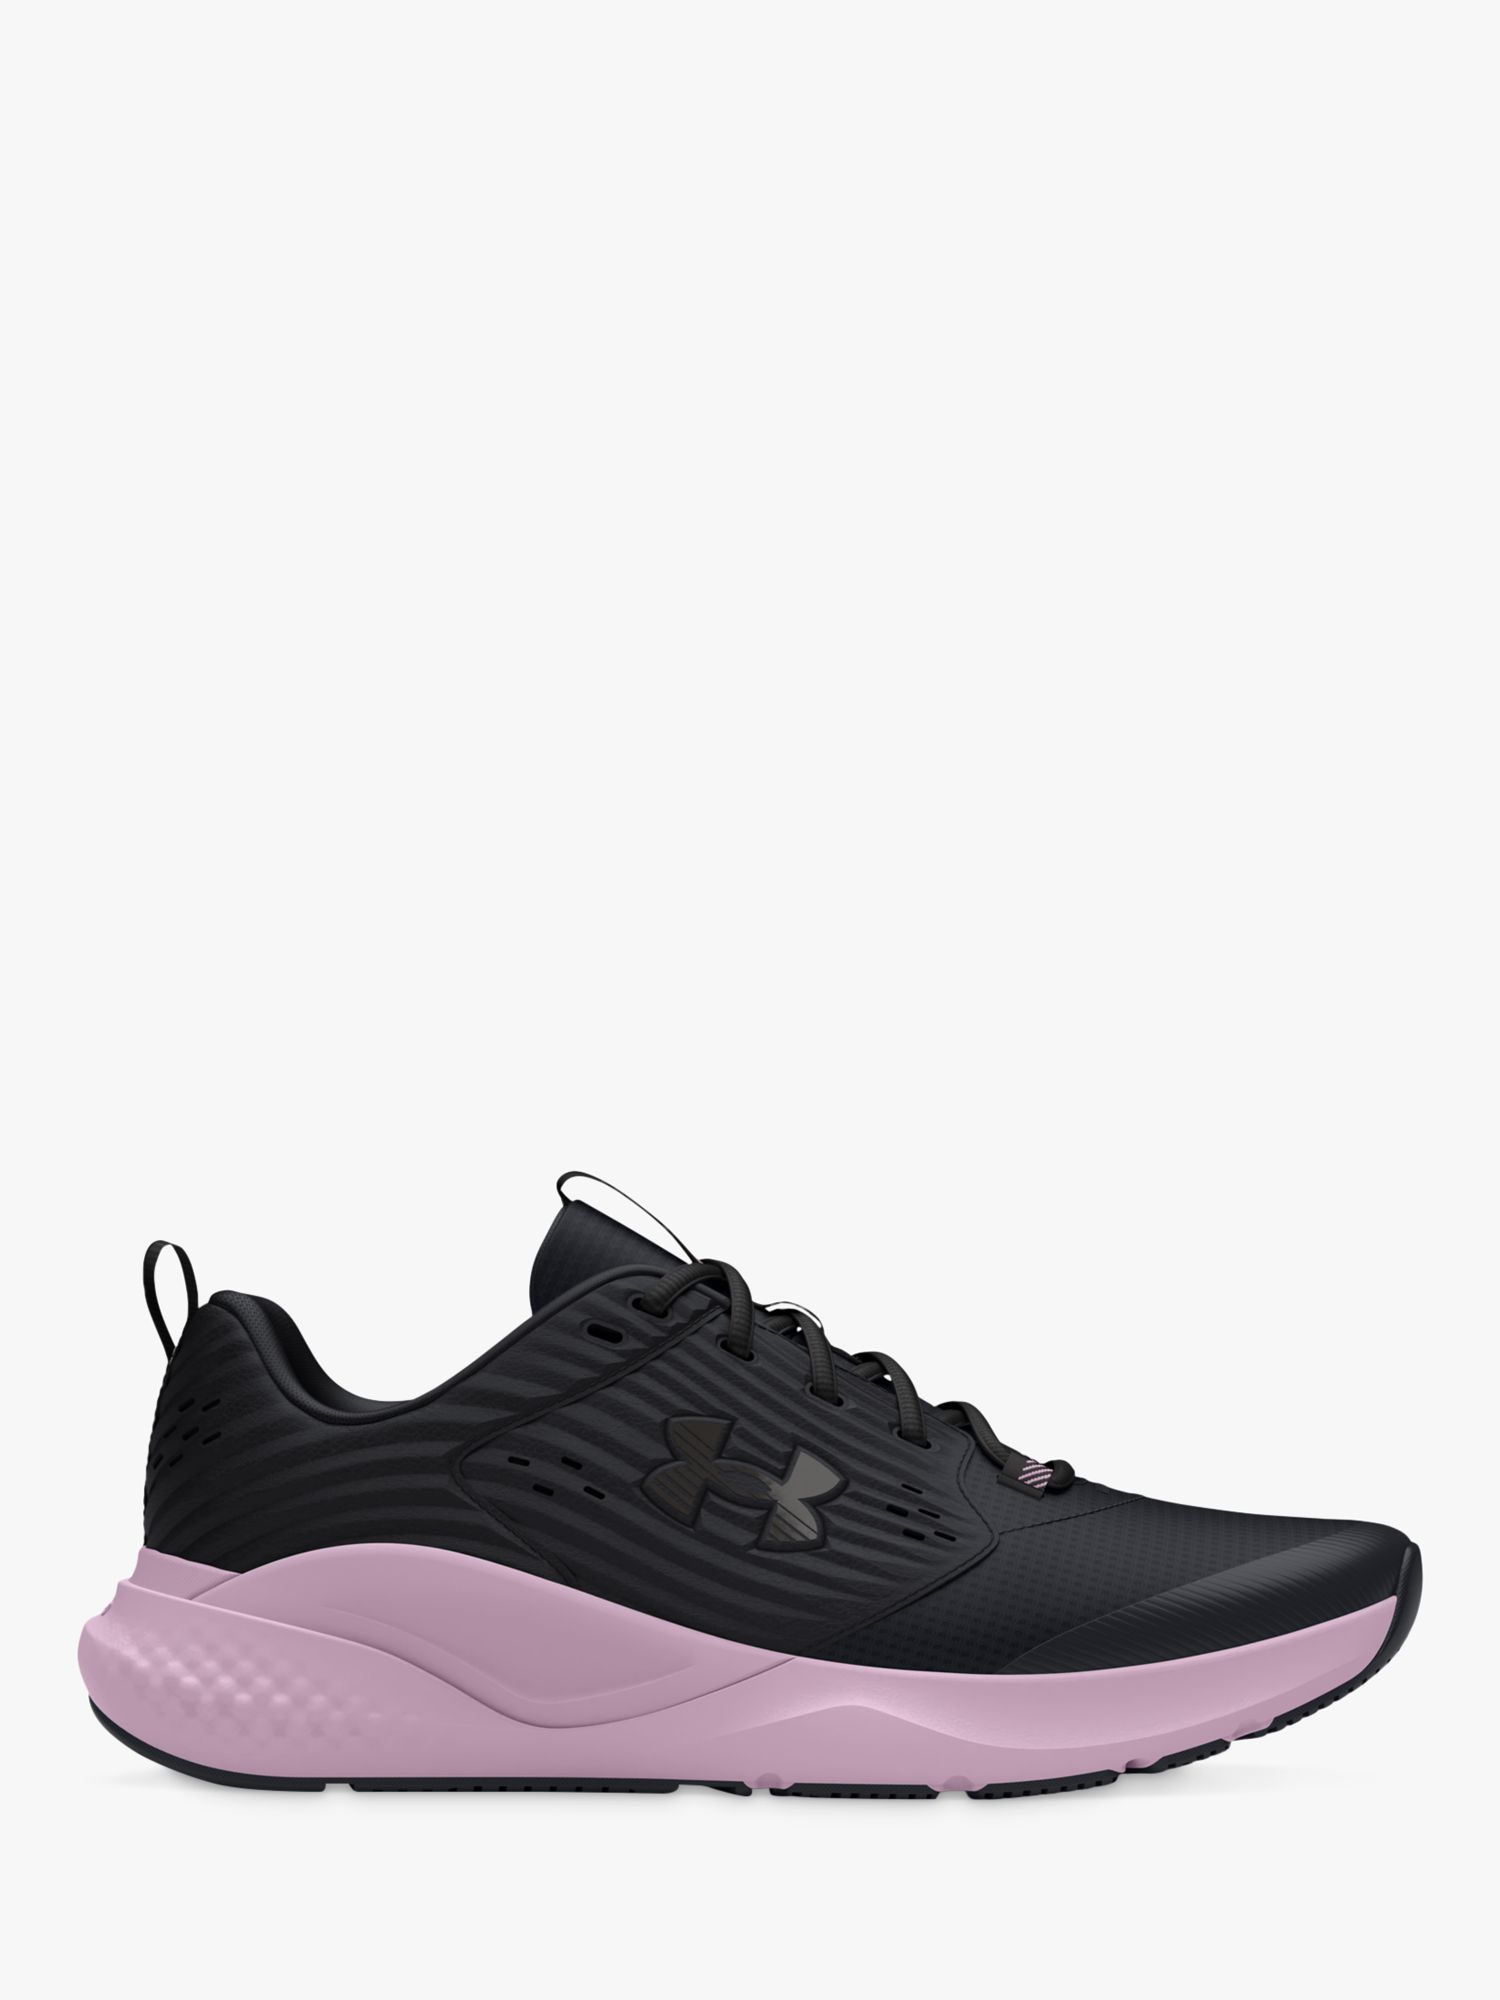 Under Armour Women's Charged Aurora 2 Trainers at John Lewis